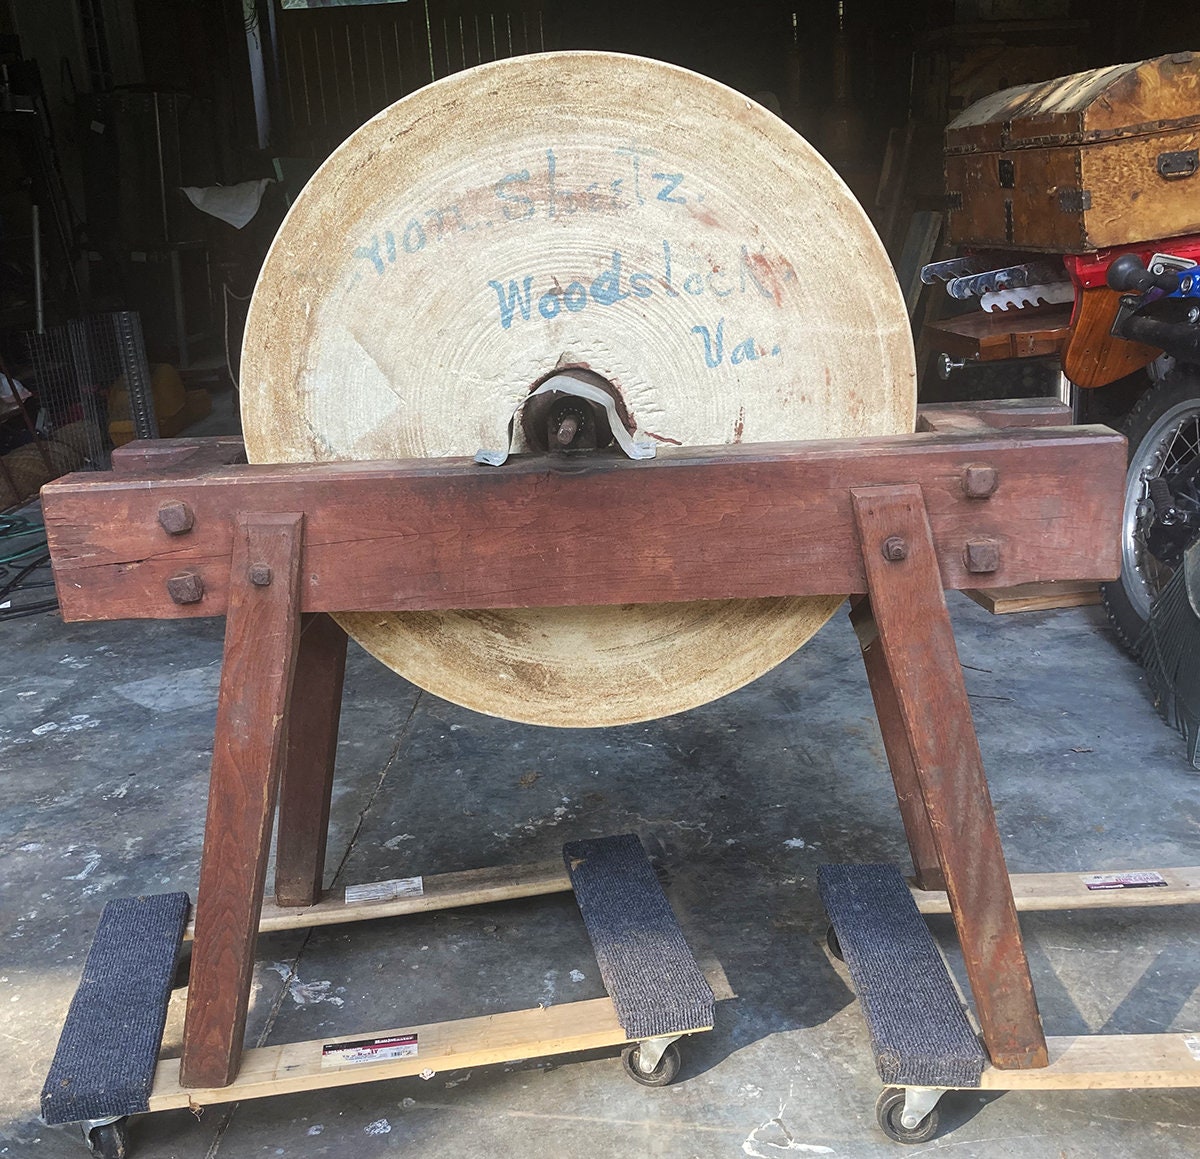 Foot-powered Grinding Wheel by Woodsmith Magazine